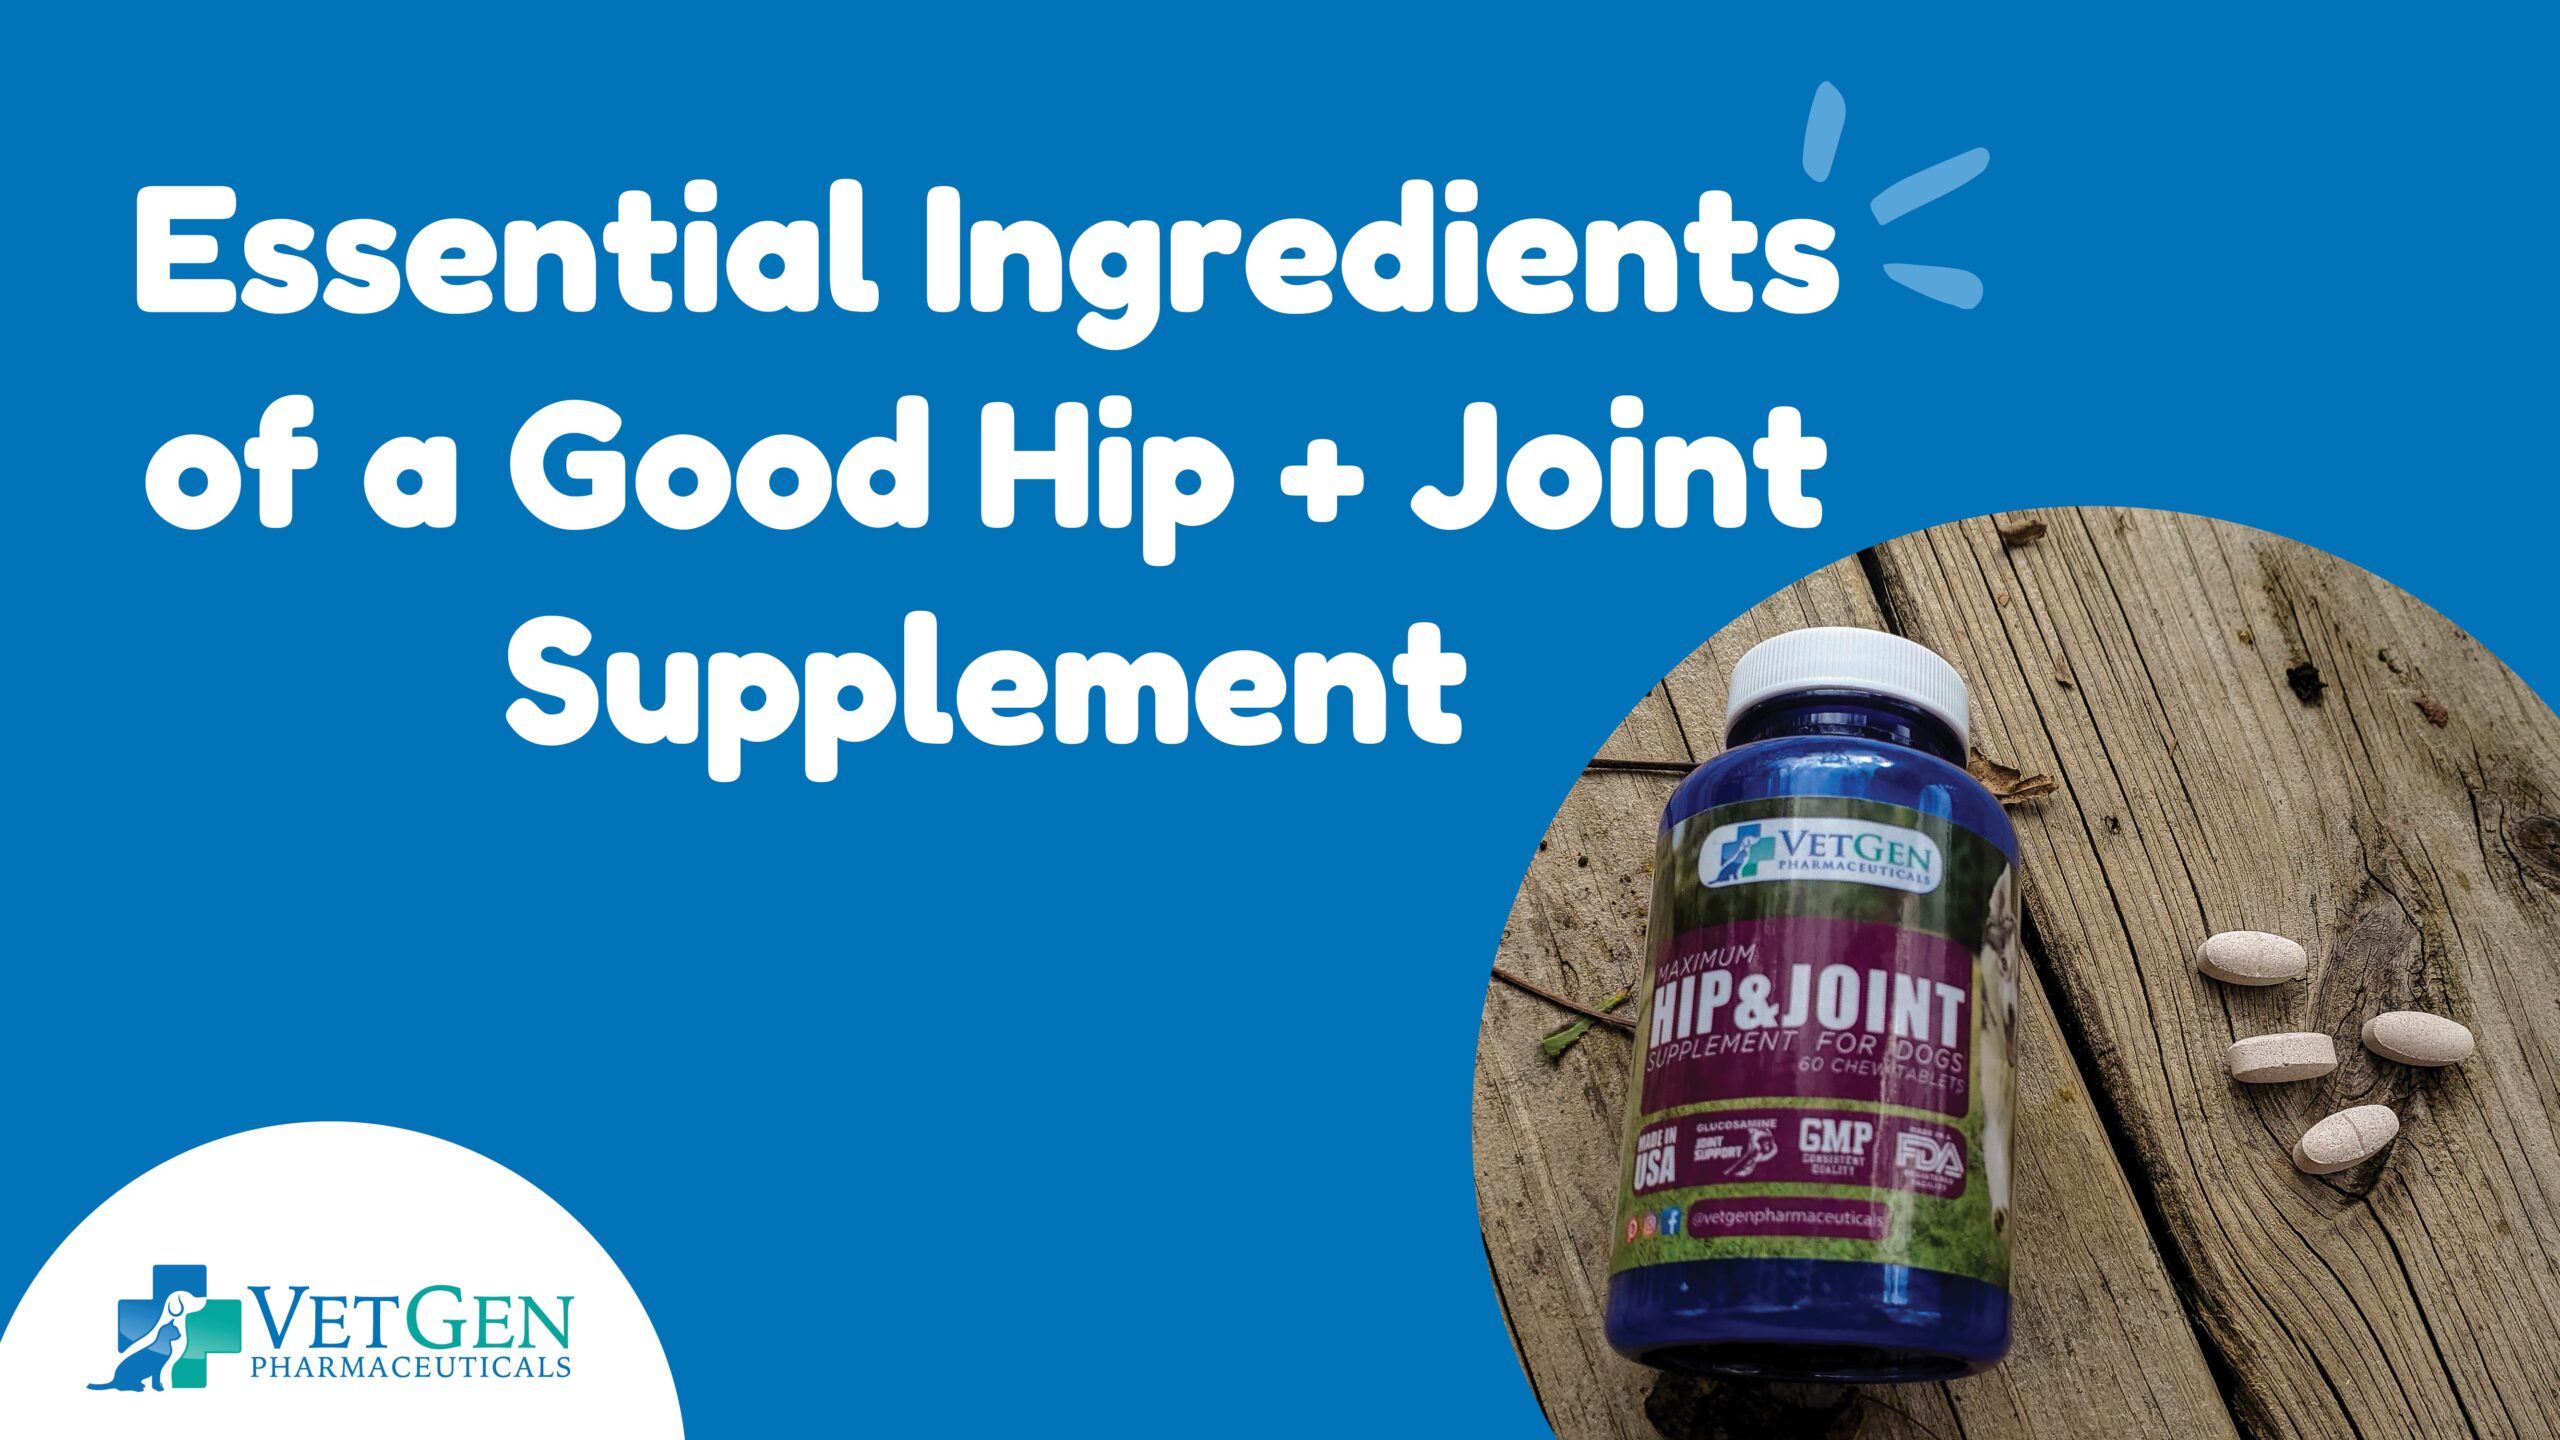 Essential Ingredients of a Good Hip + Joint Supplement